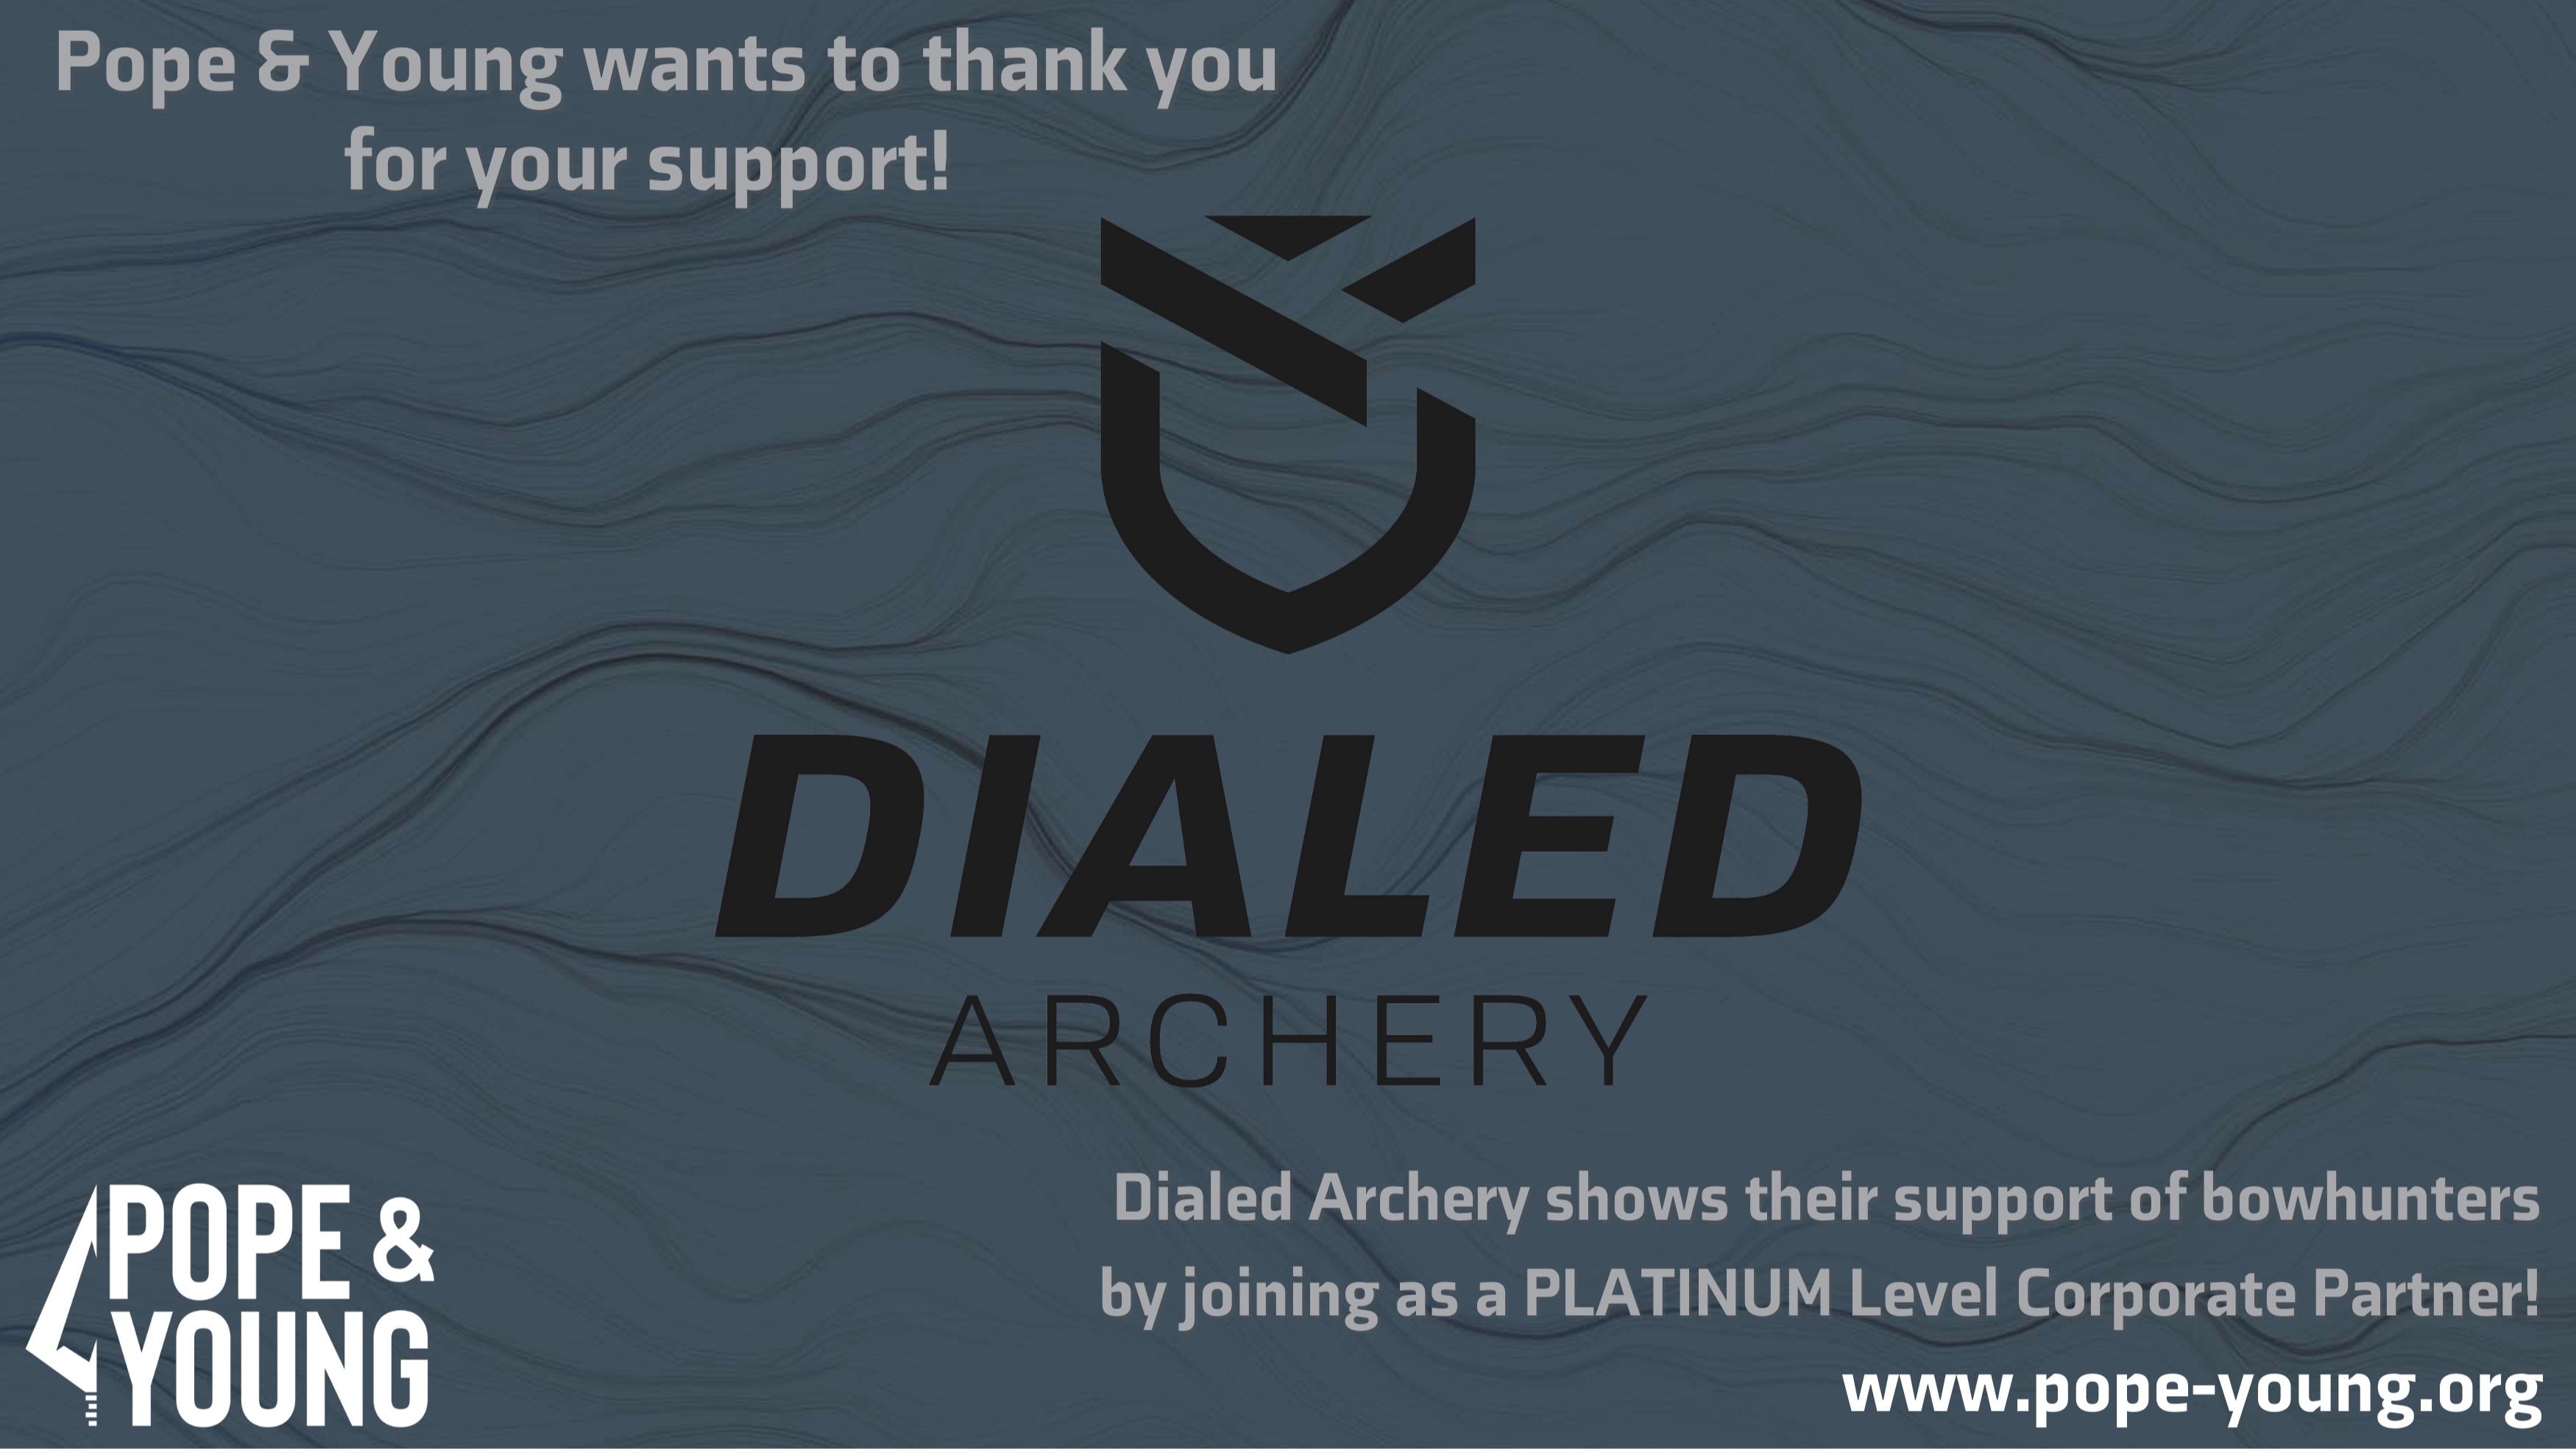 
Dialed Archery Joins in Support of Pope and Young 